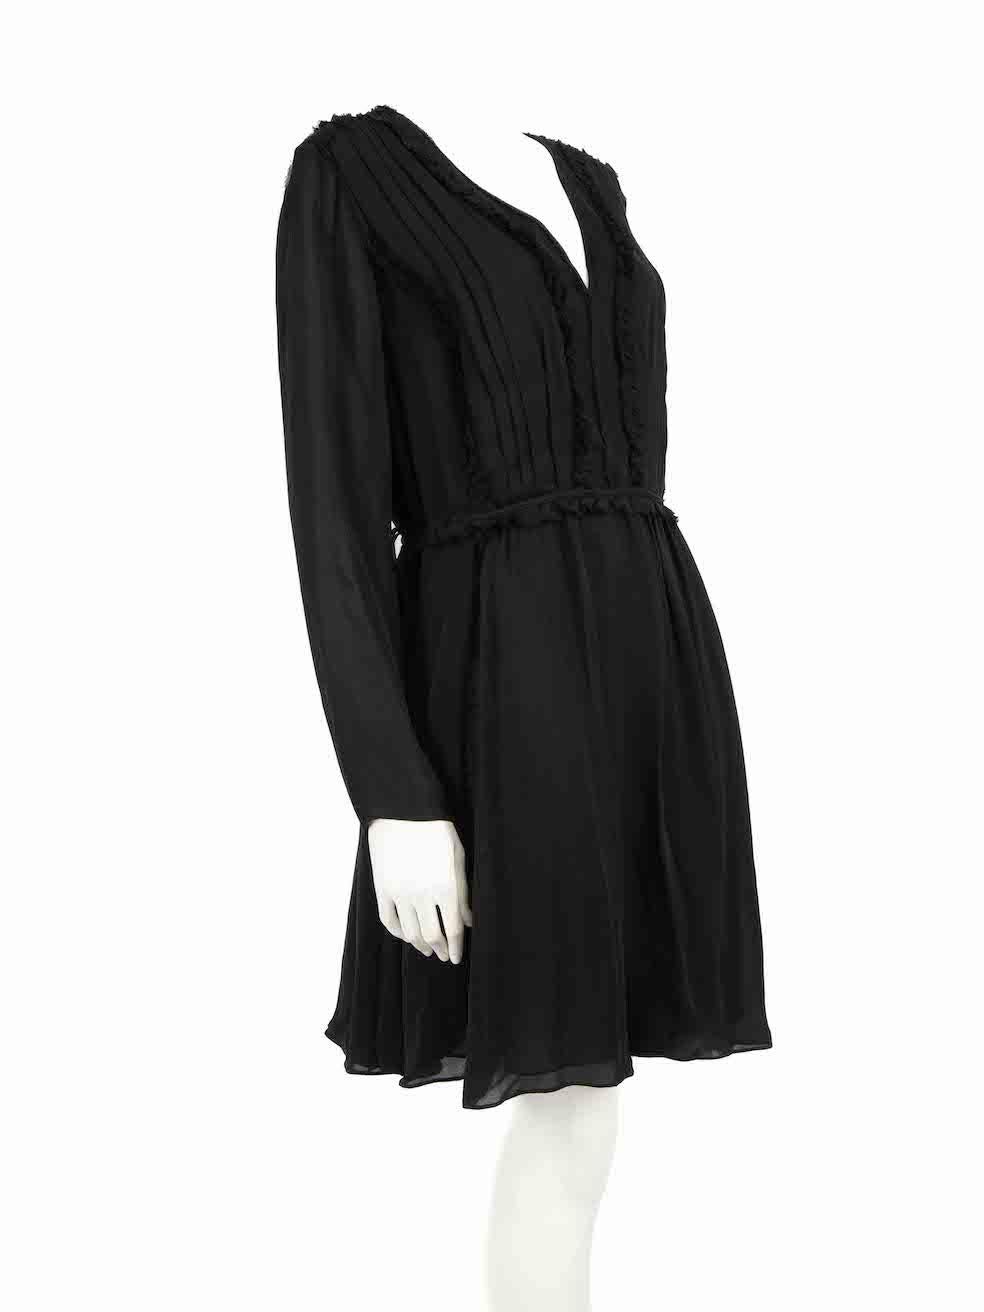 CONDITION is Very good. Minimal wear to dress is evident. Minimal wear to the front with plucks to the weave on this used Jason Wu designer resale item.
 
 
 
 Details
 
 
 Black
 
 Silk
 
 Dress
 
 Knee length
 
 V-neck
 
 Ruffle trim
 
 Long